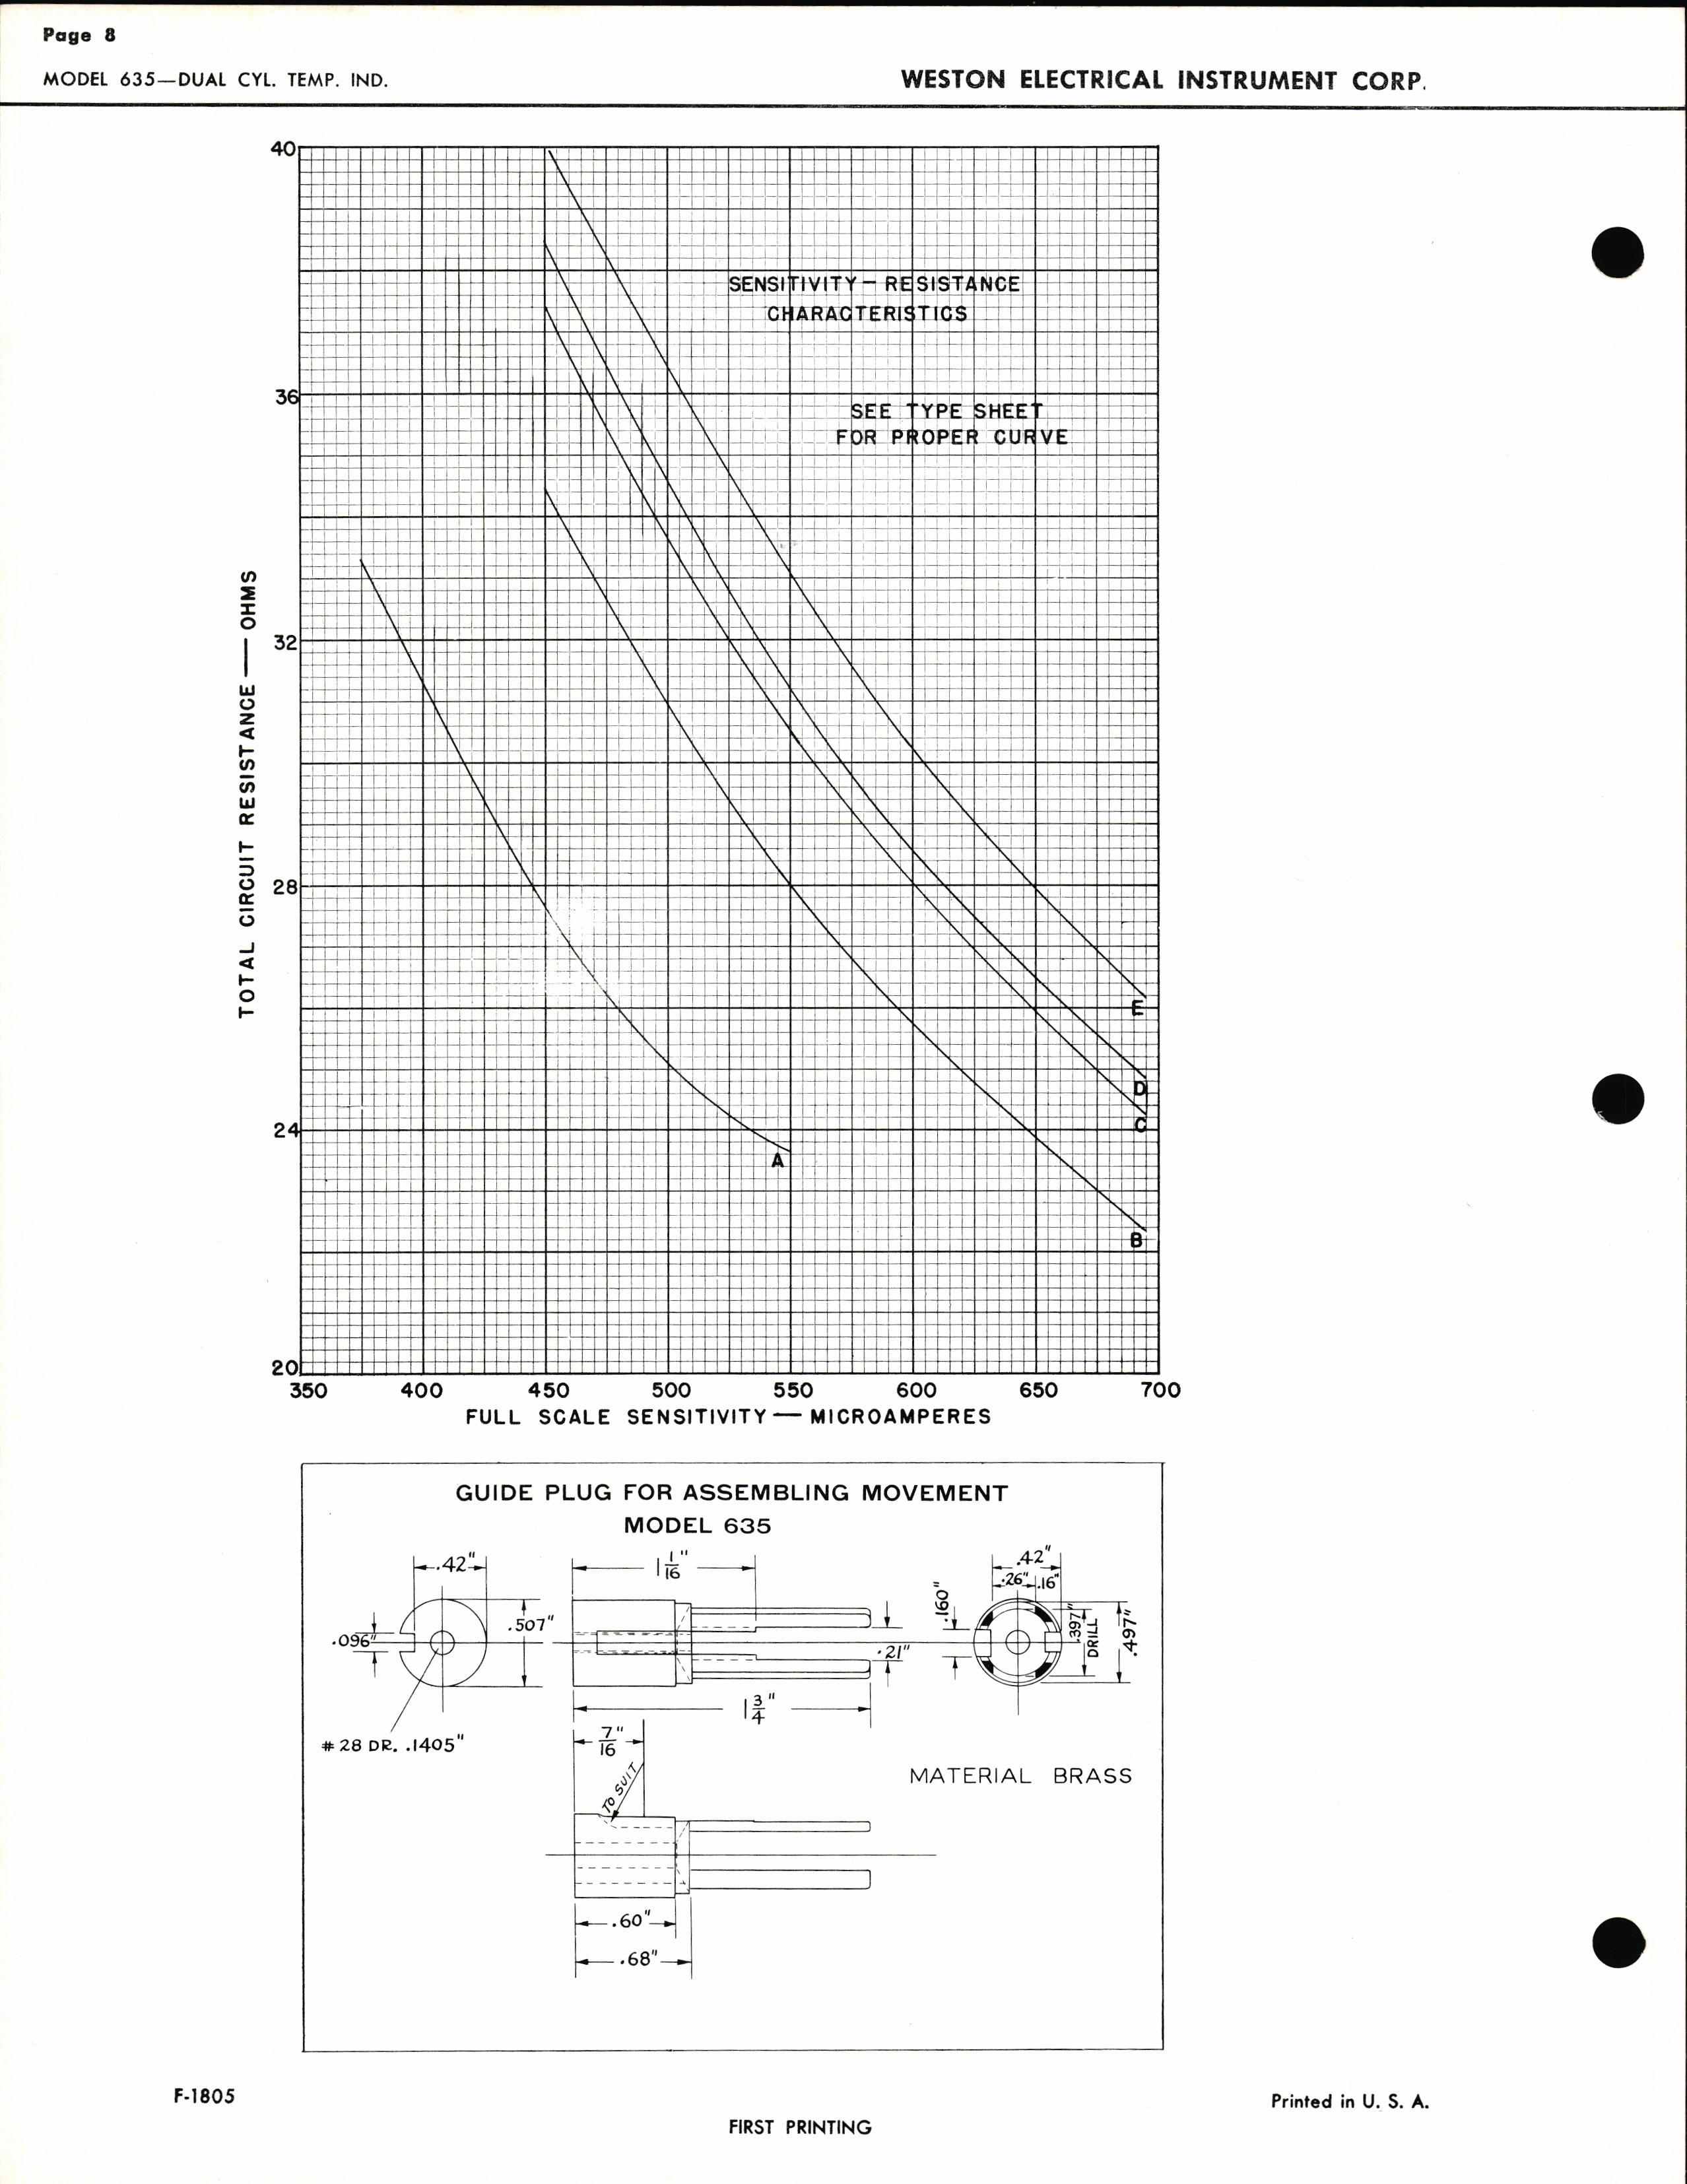 Sample page 8 from AirCorps Library document: Service Instructions for model 635 Dual Cylinder Temperature Indicators